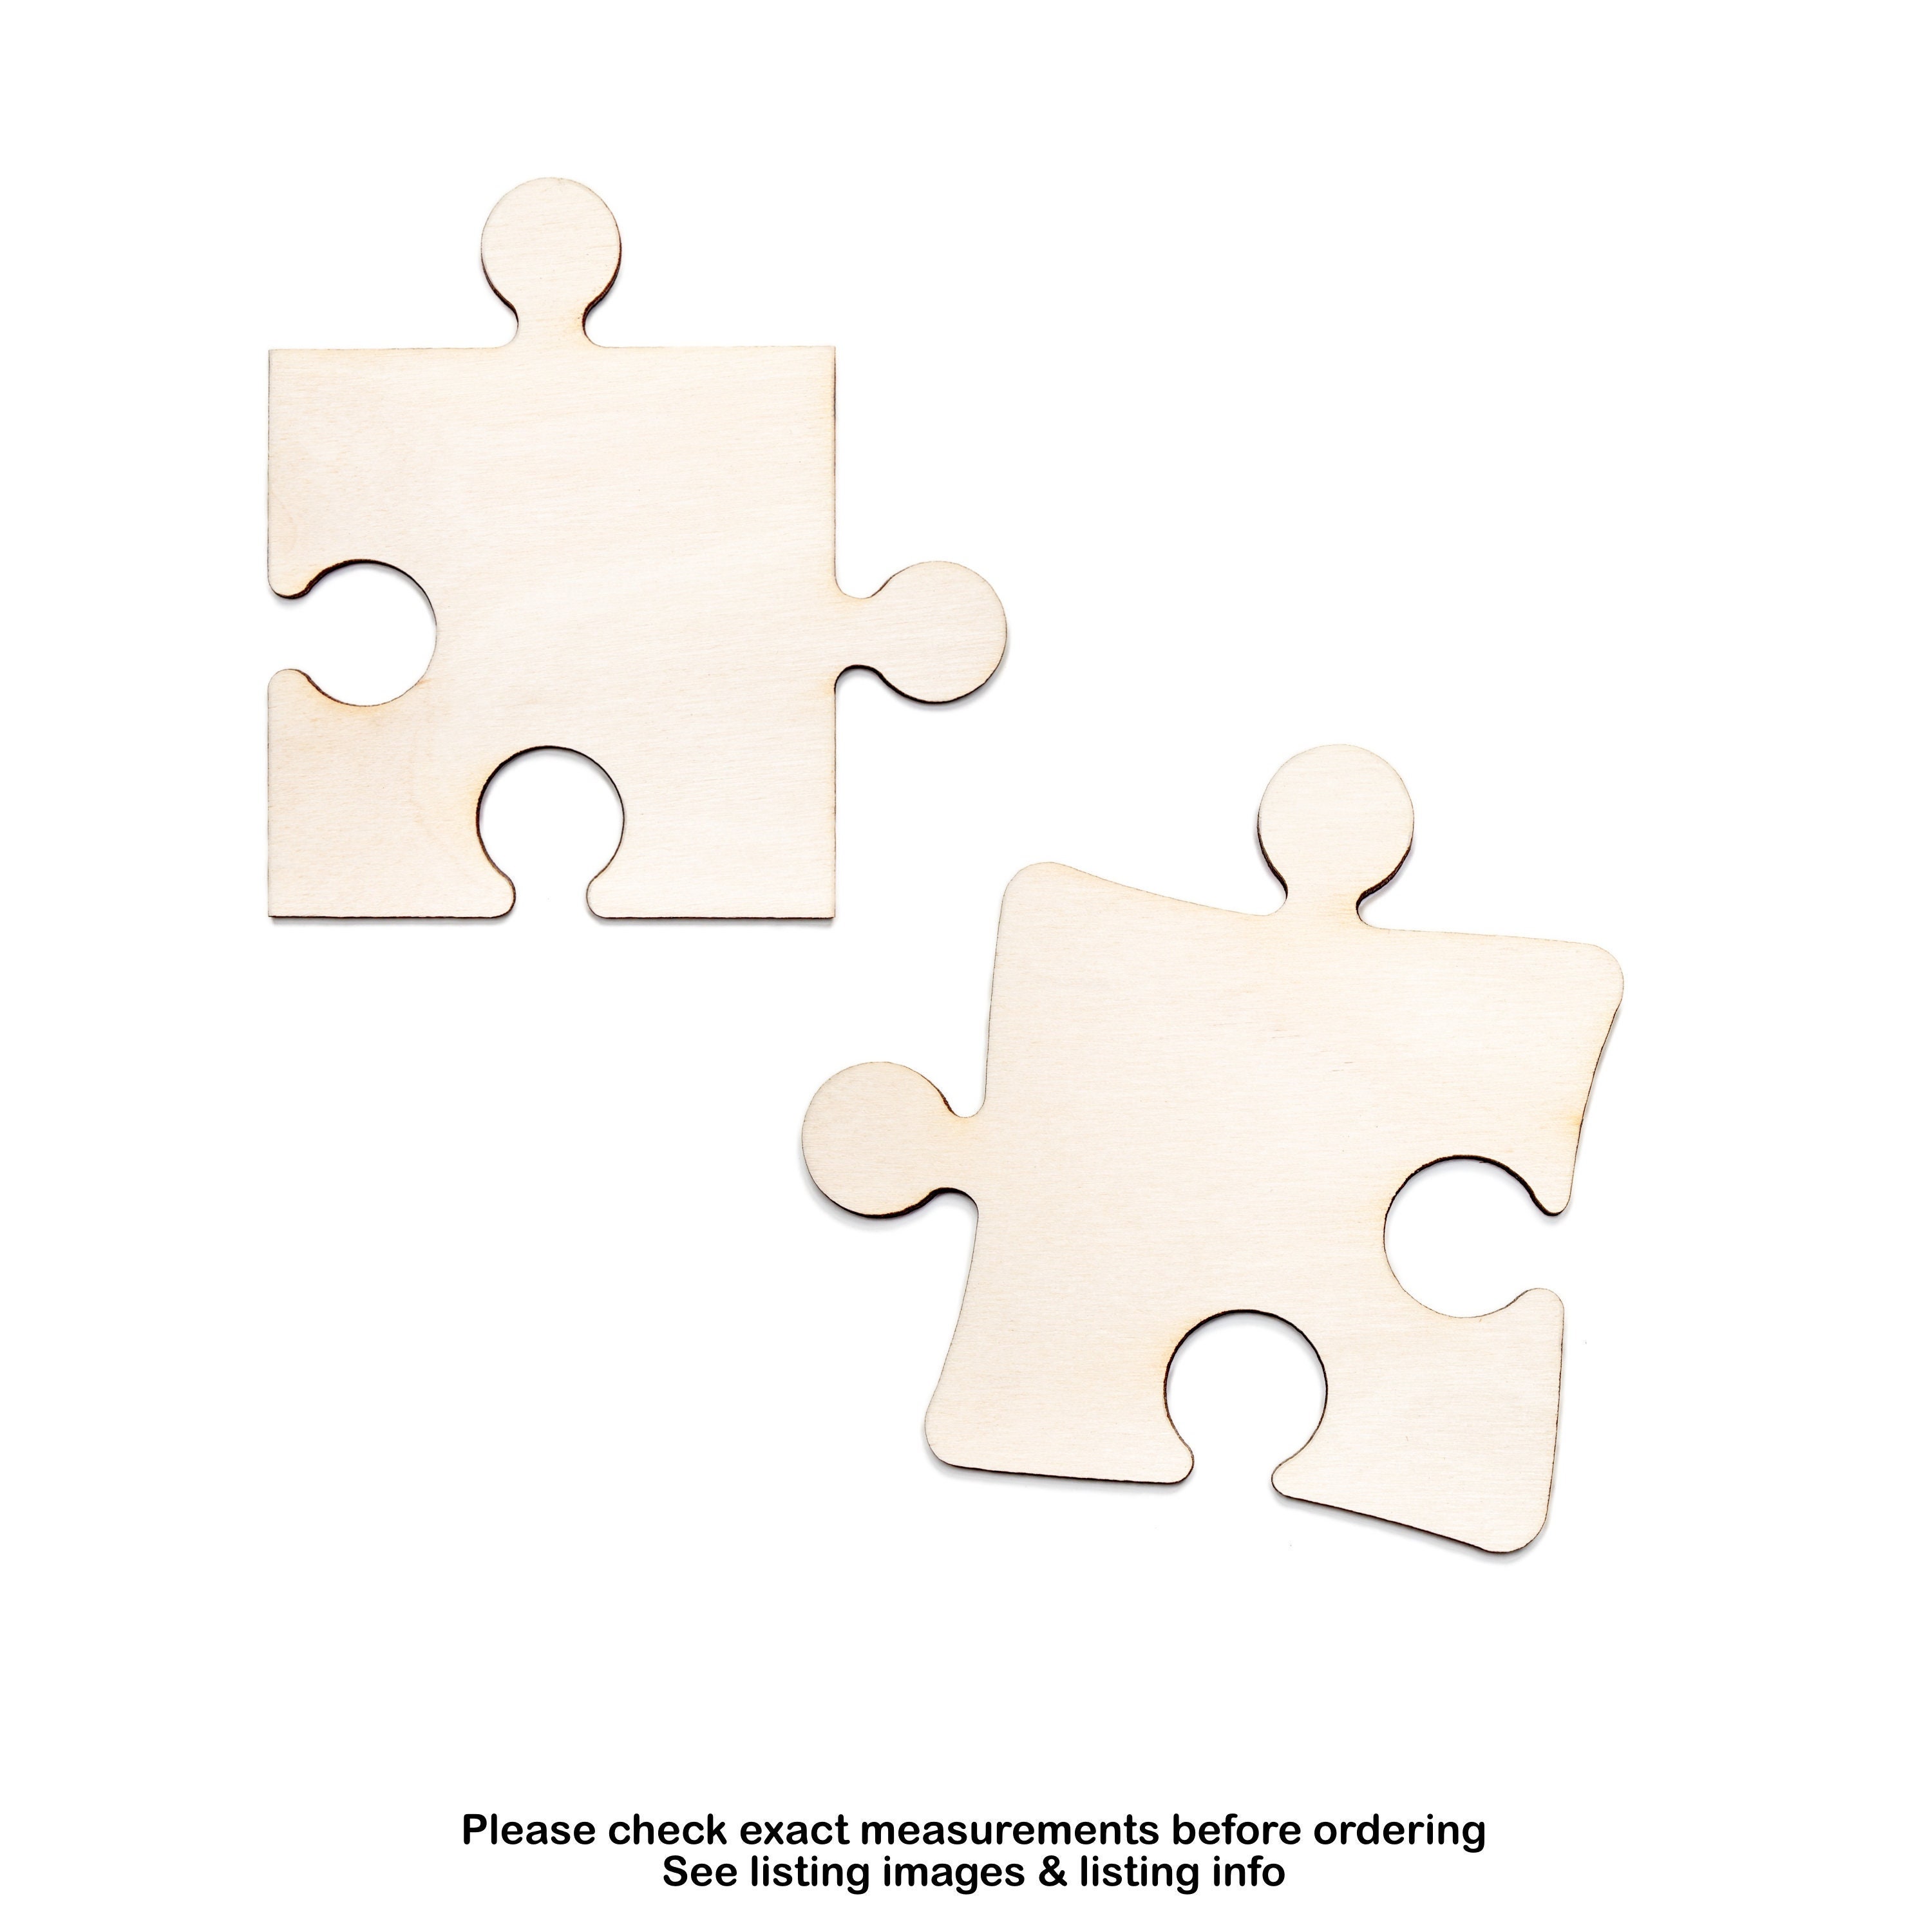 Juvale Blank Puzzle - 48-Pack White Jigsaw Puzzles for DIY Kids color-in  crafts Projects Weddings 28 Pieces Each 55 x 8 Inches